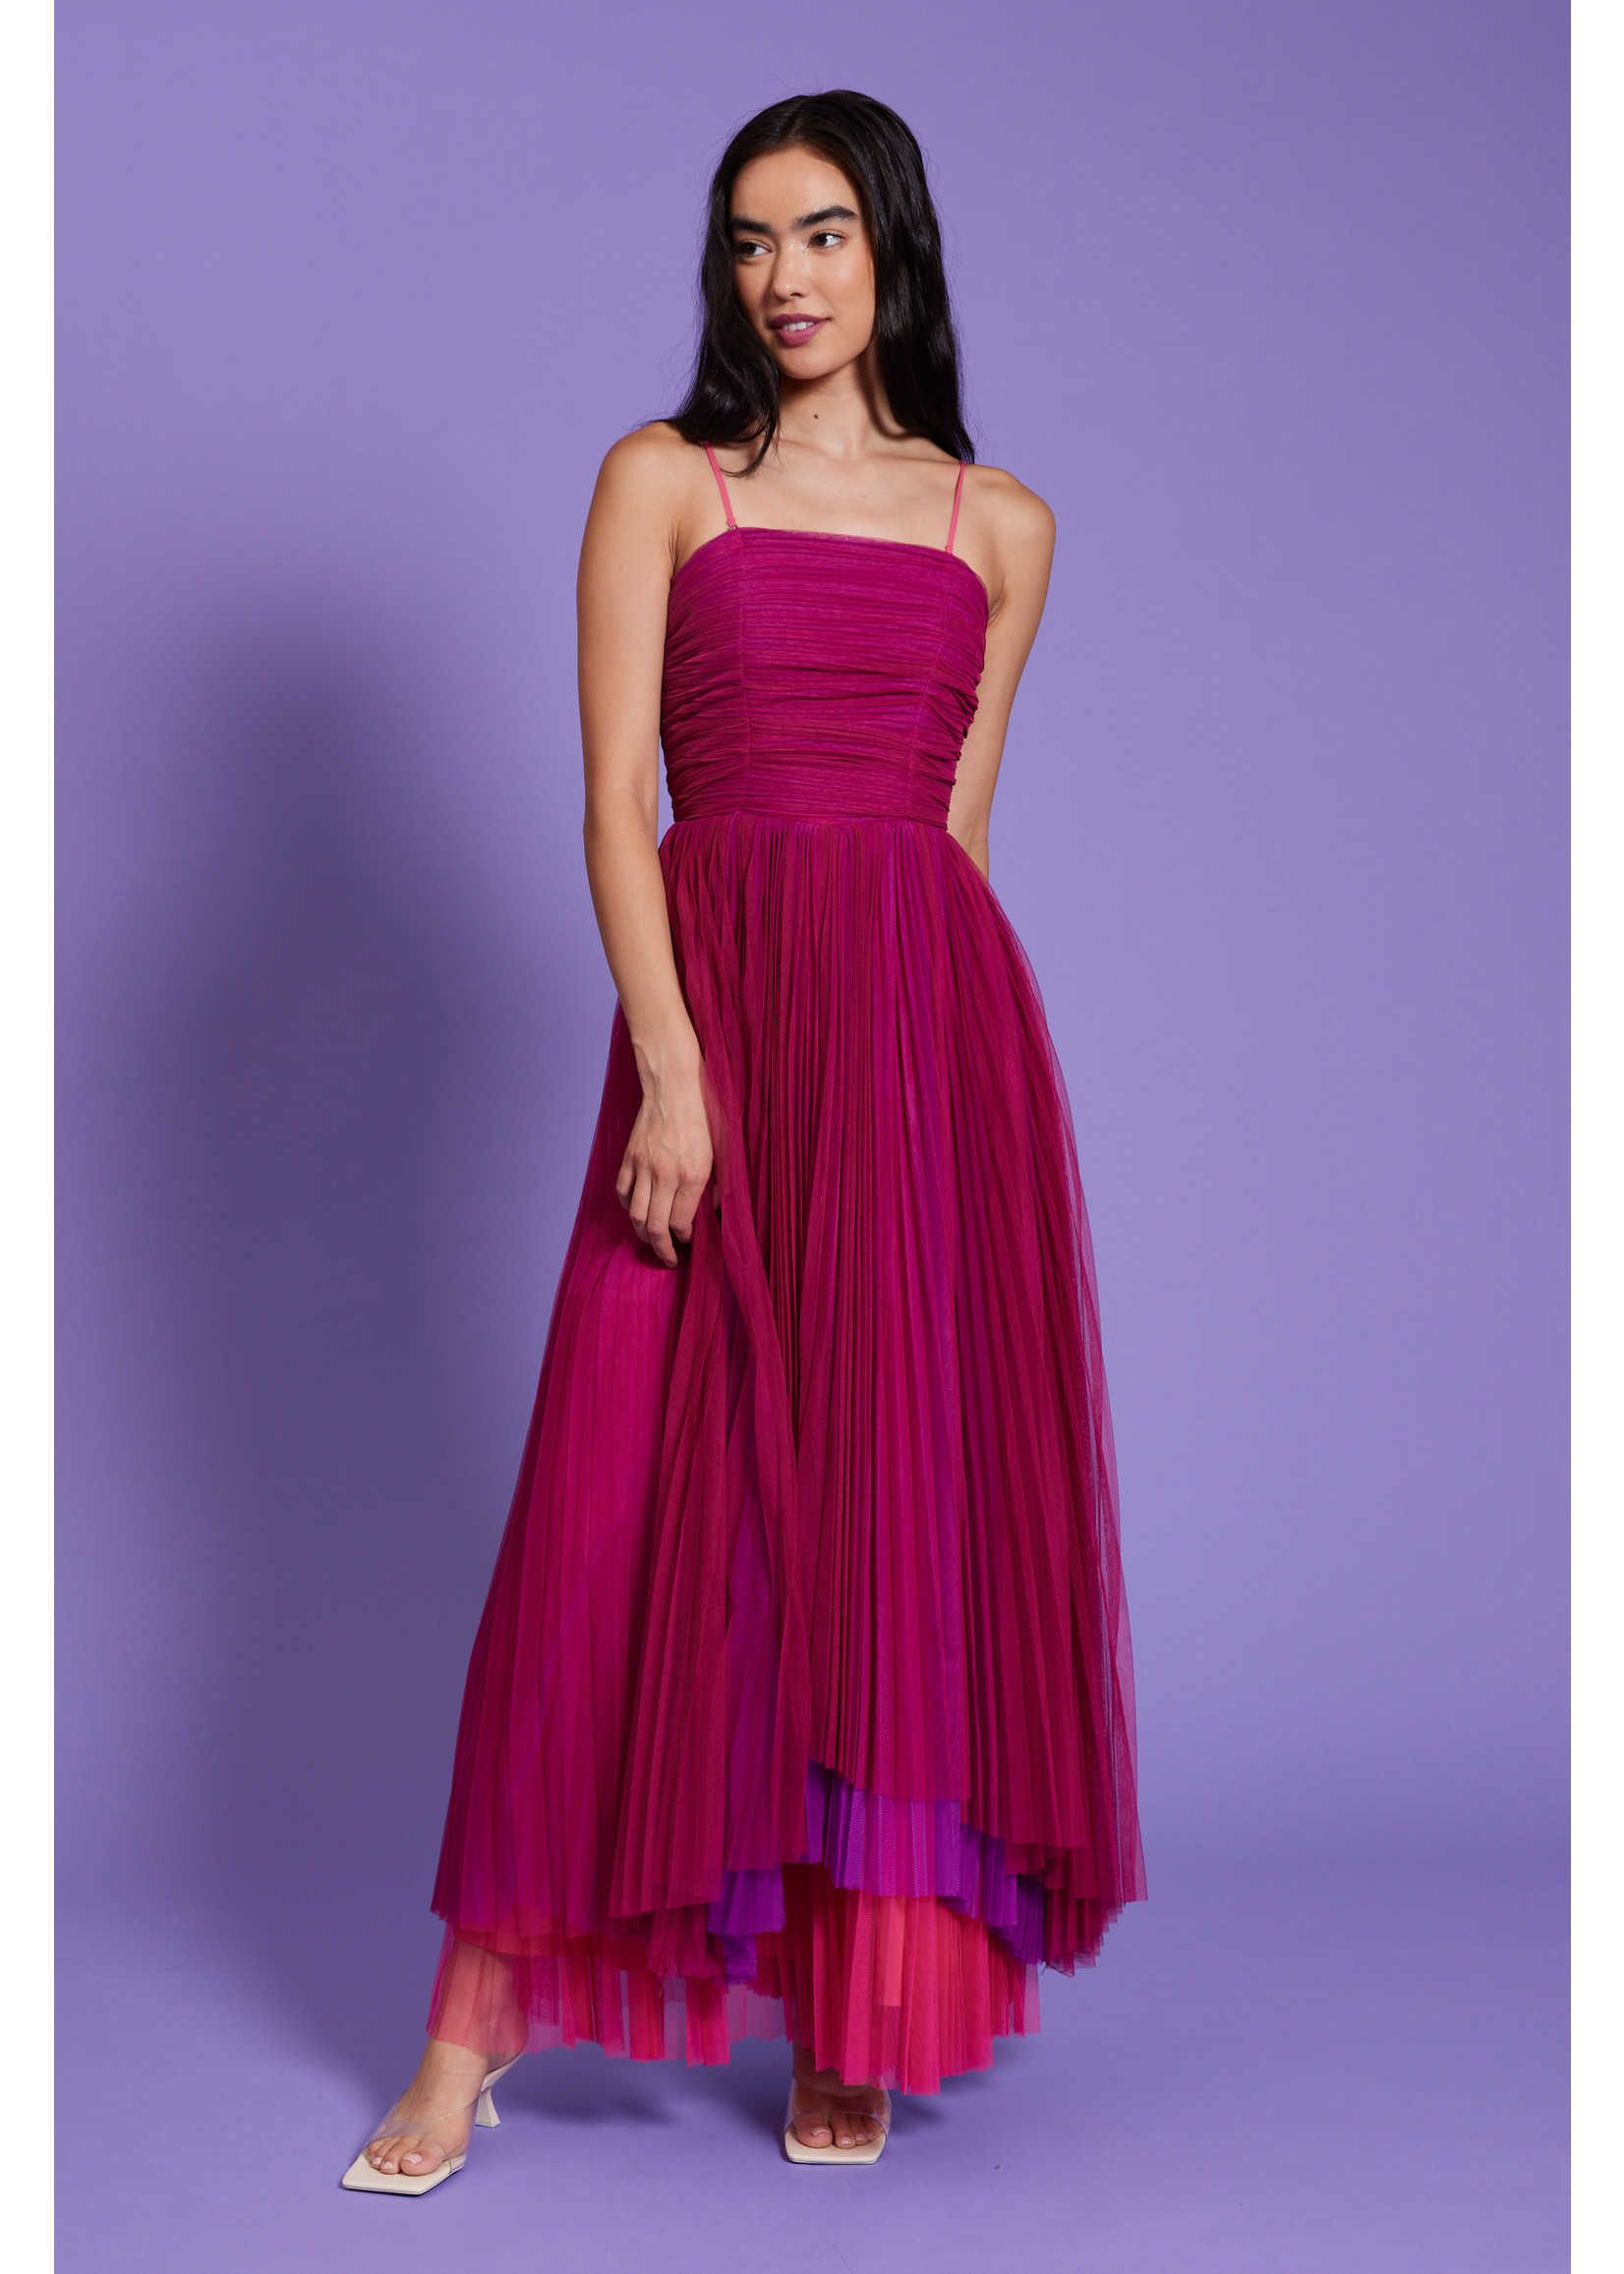 Layered Tulle Strapless Dress Magenta